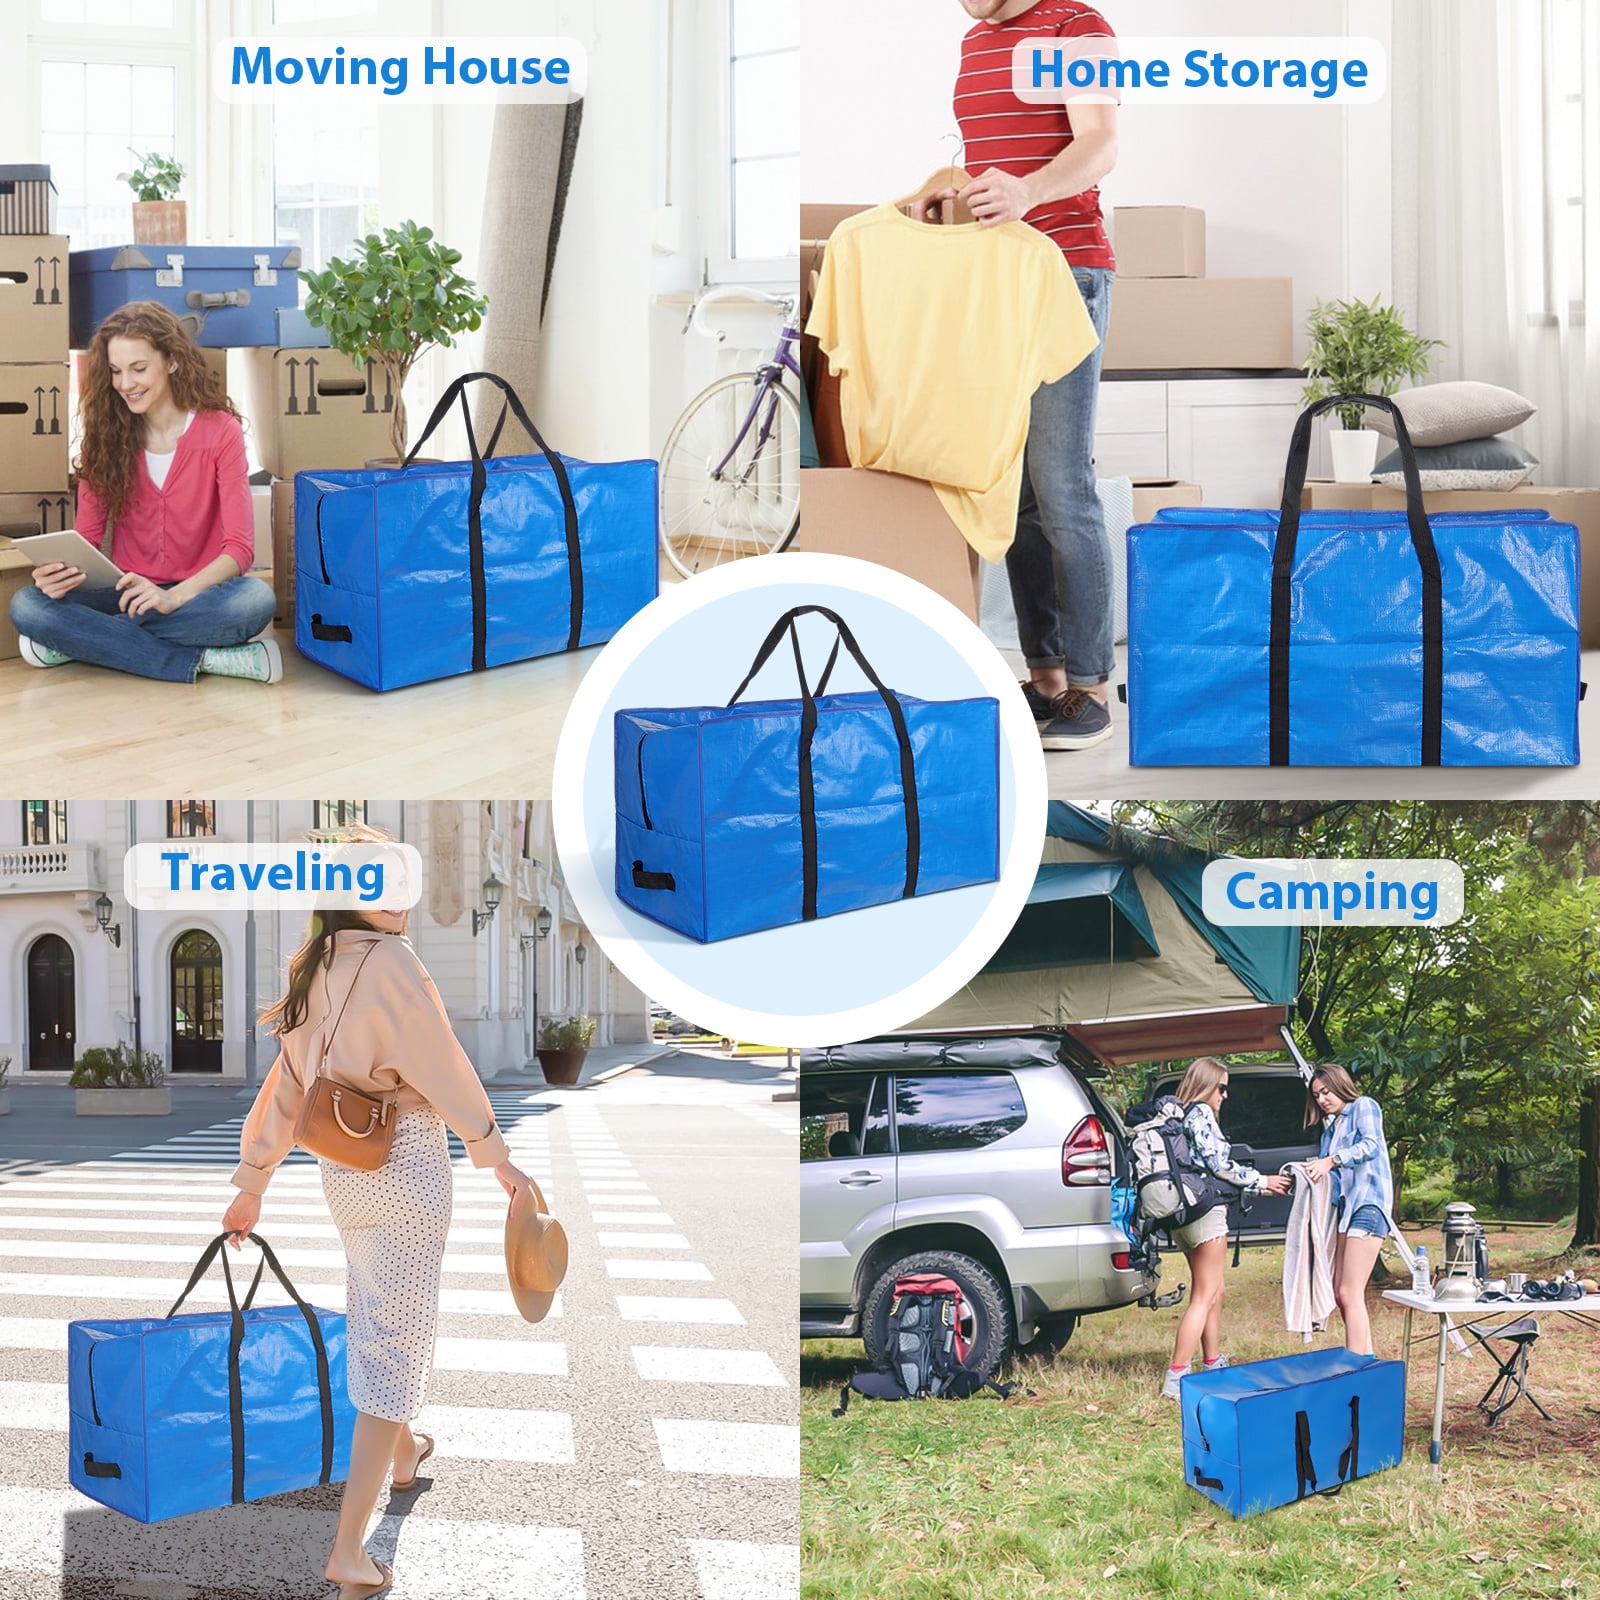  Mixweer 16 Pcs Heavy Duty Extra Large Moving Bags Oversize  Waterproof Storage Bags with Zippers, Handles 29 x 14 x 13'' Packing Bags  for Moving Storage Tote for Space Saving Moving